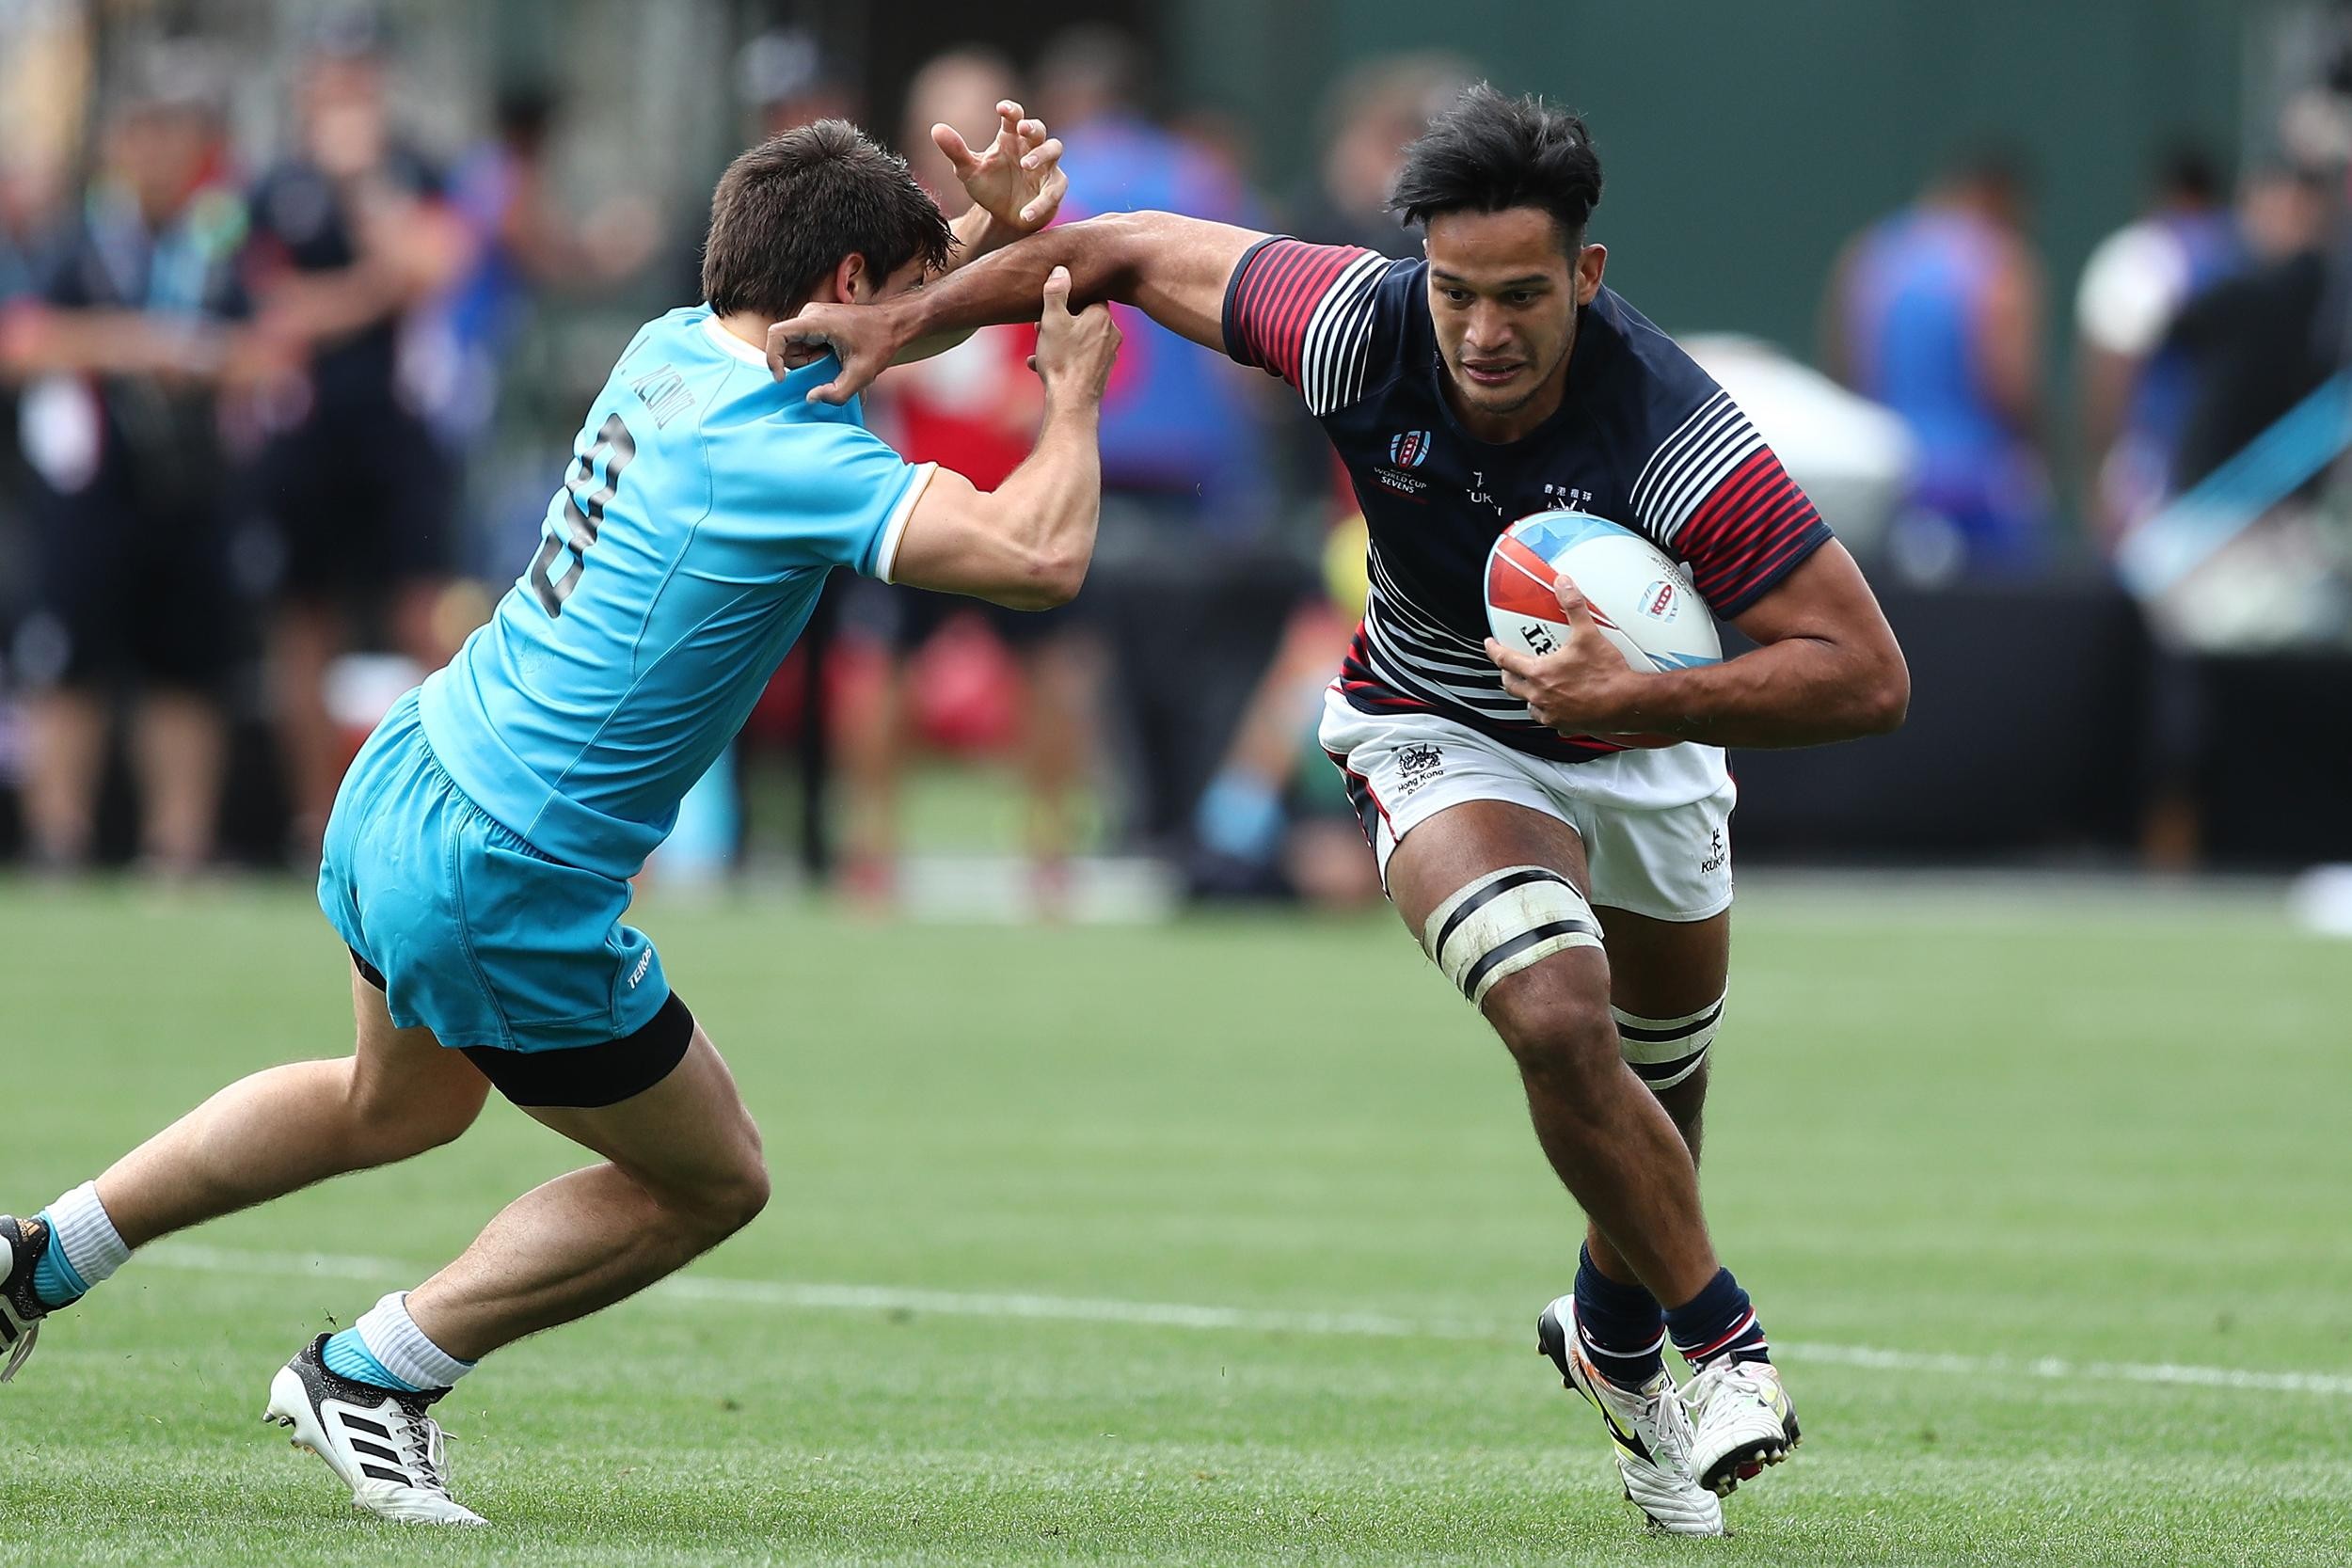 Hong Kong's Michael Coverdale carries against Uruguay. Photo: World Rugby